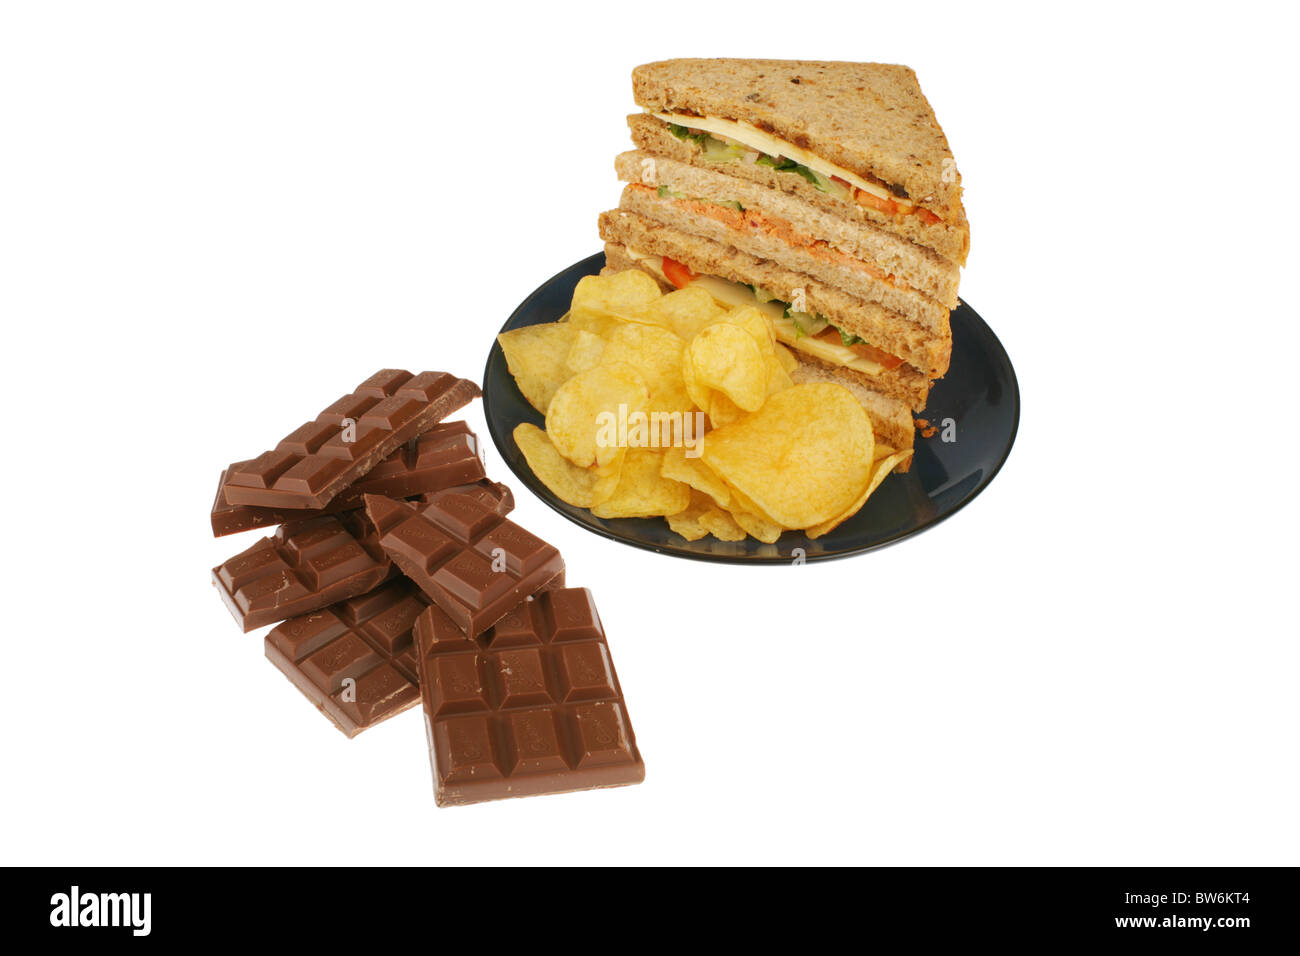 Sandwiches and Chocolate Stock Photo